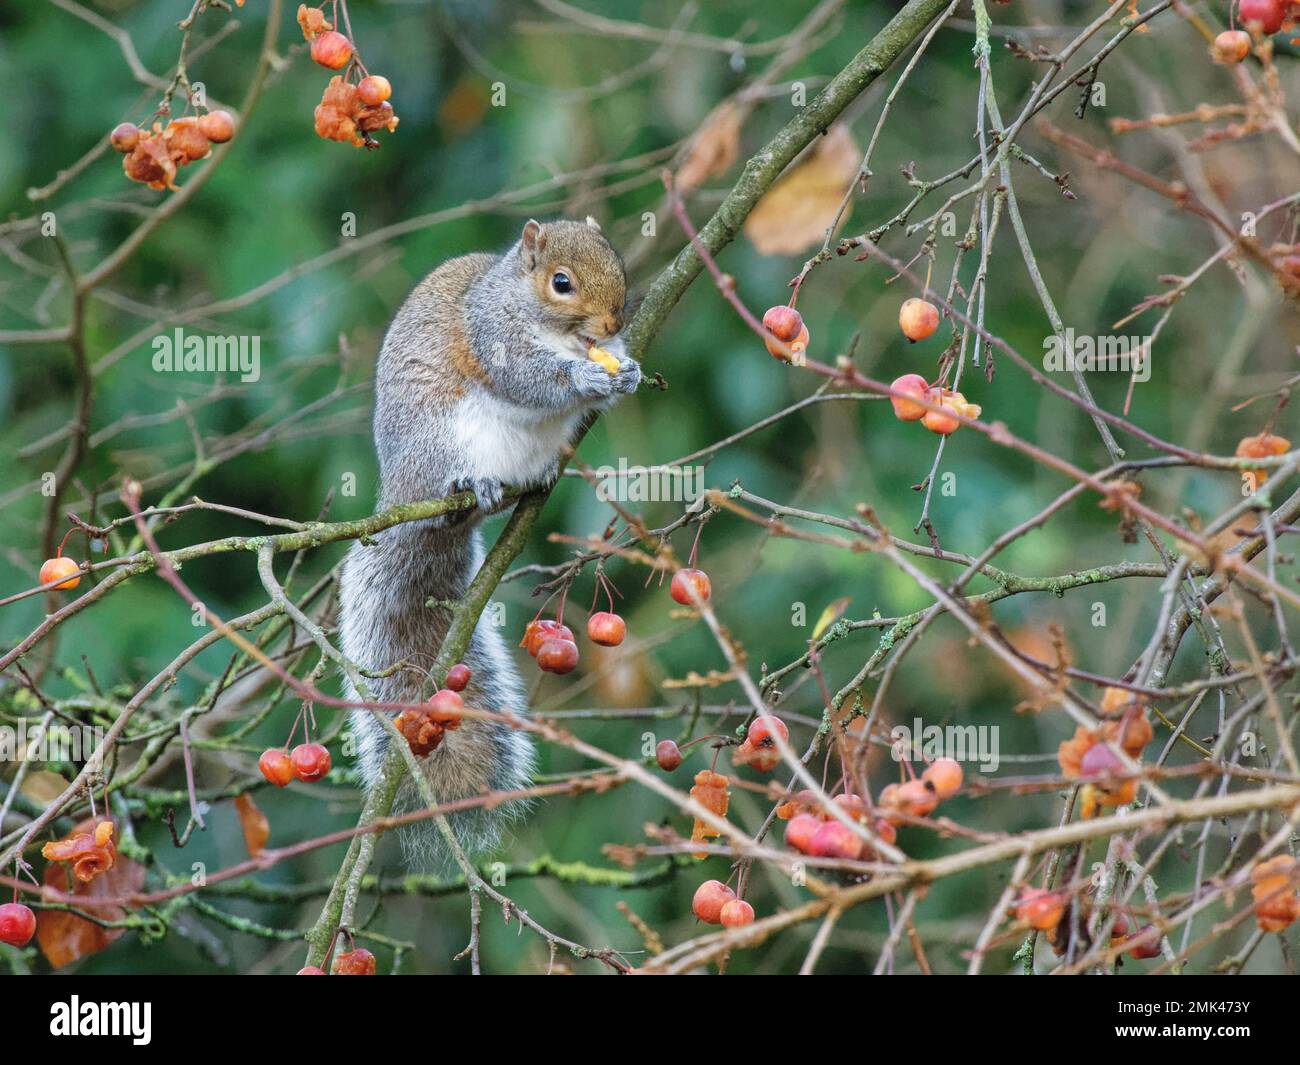 Grey squirrel (Sciurus carolinensis) eating a Crab apple (Malus sylvestris) it has just picked from a tree in a garden, Wiltshire, UK, December. Stock Photo